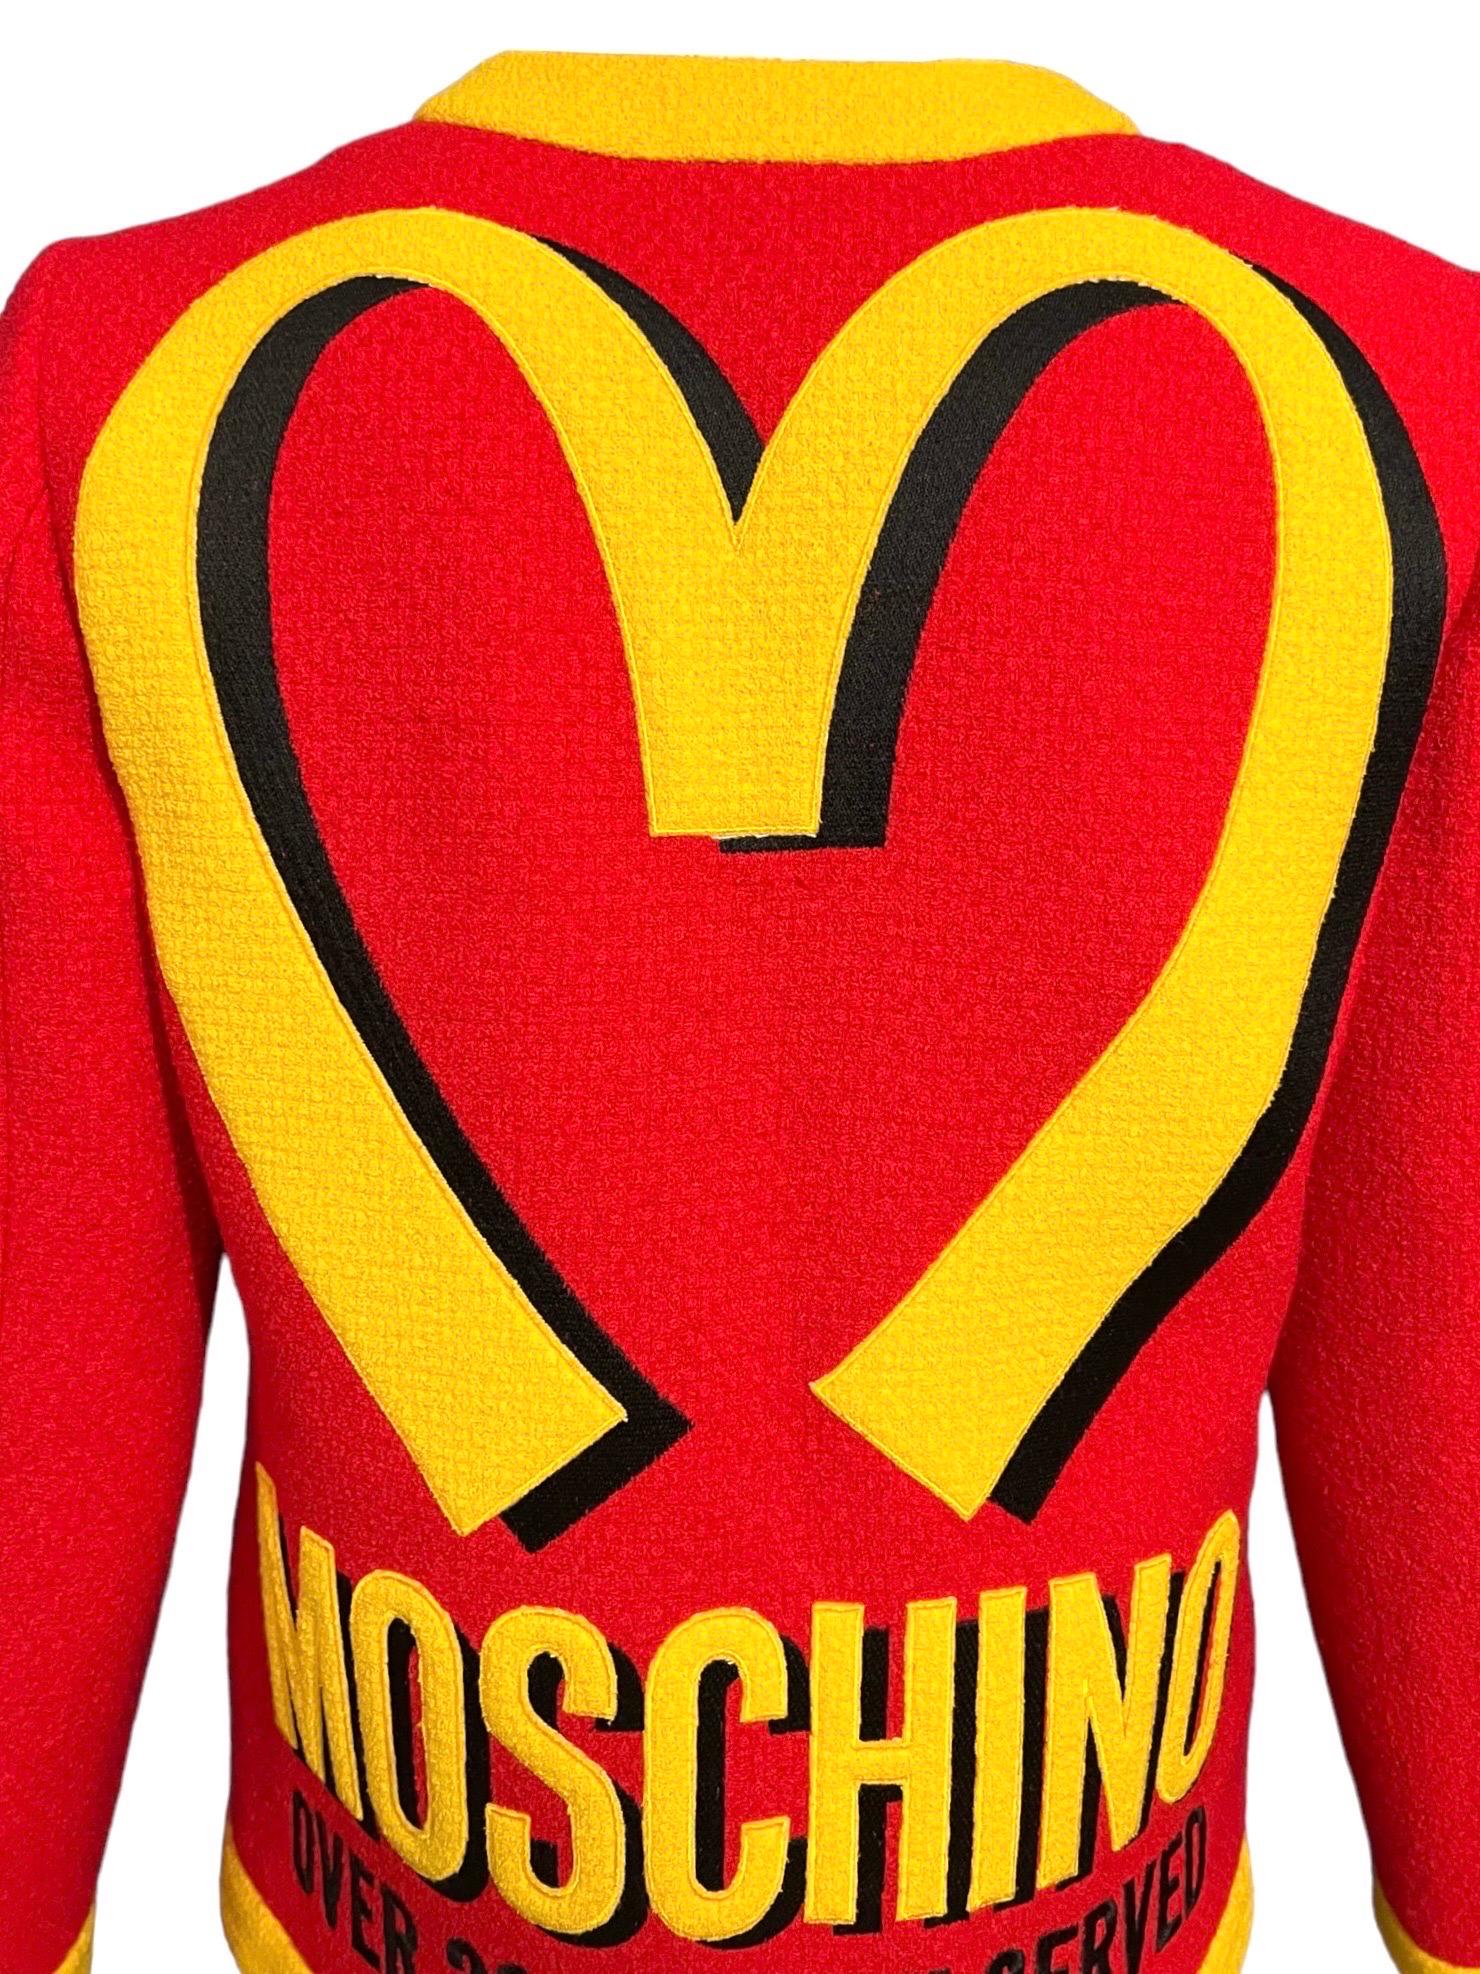 Moschino Couture McDonalds Runway Tweed Blazer F/W 2014 For Sale 8